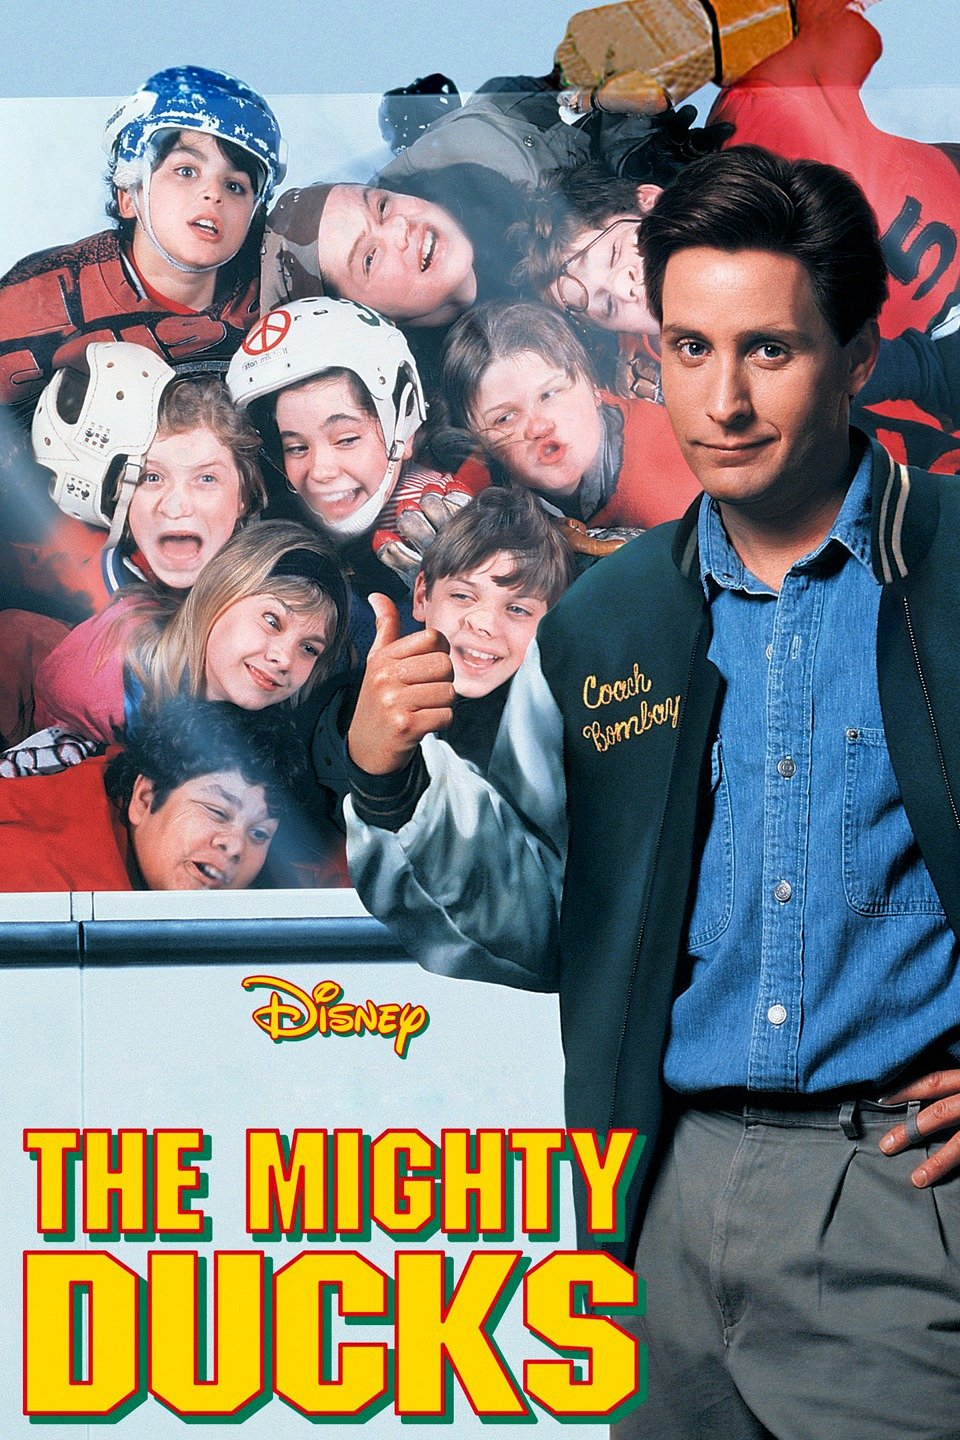 Sparky Movie Review: The Mighty Ducks - House of Sparky